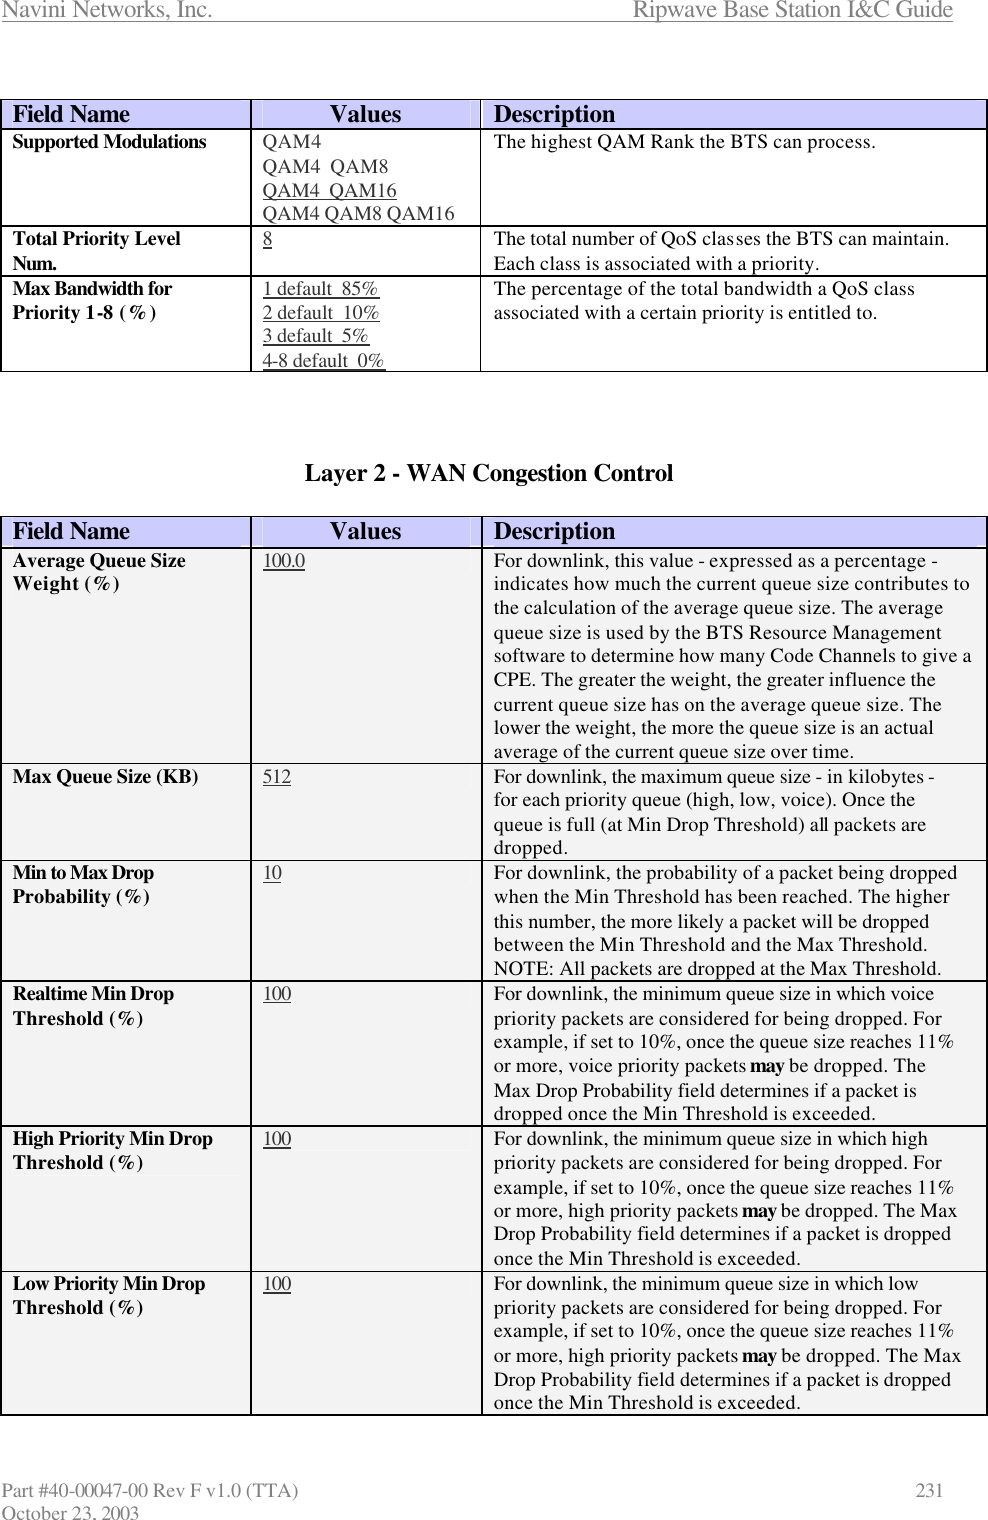 Navini Networks, Inc.                      Ripwave Base Station I&amp;C Guide Part #40-00047-00 Rev F v1.0 (TTA)            231 October 23, 2003  Field Name Values Description Supported Modulations QAM4 QAM4  QAM8 QAM4  QAM16 QAM4 QAM8 QAM16 The highest QAM Rank the BTS can process. Total Priority Level Num. 8 The total number of QoS classes the BTS can maintain. Each class is associated with a priority. Max Bandwidth for Priority 1-8 (%) 1 default  85% 2 default  10%  3 default  5% 4-8 default  0% The percentage of the total bandwidth a QoS class associated with a certain priority is entitled to.    Layer 2 - WAN Congestion Control  Field Name Values Description Average Queue Size Weight (%) 100.0 For downlink, this value - expressed as a percentage - indicates how much the current queue size contributes to the calculation of the average queue size. The average queue size is used by the BTS Resource Management software to determine how many Code Channels to give a CPE. The greater the weight, the greater influence the current queue size has on the average queue size. The lower the weight, the more the queue size is an actual average of the current queue size over time. Max Queue Size (KB) 512 For downlink, the maximum queue size - in kilobytes - for each priority queue (high, low, voice). Once the queue is full (at Min Drop Threshold) all packets are dropped.  Min to Max Drop Probability (%) 10 For downlink, the probability of a packet being dropped when the Min Threshold has been reached. The higher this number, the more likely a packet will be dropped between the Min Threshold and the Max Threshold.  NOTE: All packets are dropped at the Max Threshold. Realtime Min Drop Threshold (%) 100 For downlink, the minimum queue size in which voice priority packets are considered for being dropped. For example, if set to 10%, once the queue size reaches 11% or more, voice priority packets may be dropped. The Max Drop Probability field determines if a packet is dropped once the Min Threshold is exceeded. High Priority Min Drop Threshold (%) 100 For downlink, the minimum queue size in which high priority packets are considered for being dropped. For example, if set to 10%, once the queue size reaches 11% or more, high priority packets may be dropped. The Max Drop Probability field determines if a packet is dropped once the Min Threshold is exceeded. Low Priority Min Drop Threshold (%) 100 For downlink, the minimum queue size in which low priority packets are considered for being dropped. For example, if set to 10%, once the queue size reaches 11% or more, high priority packets may be dropped. The Max Drop Probability field determines if a packet is dropped once the Min Threshold is exceeded. 